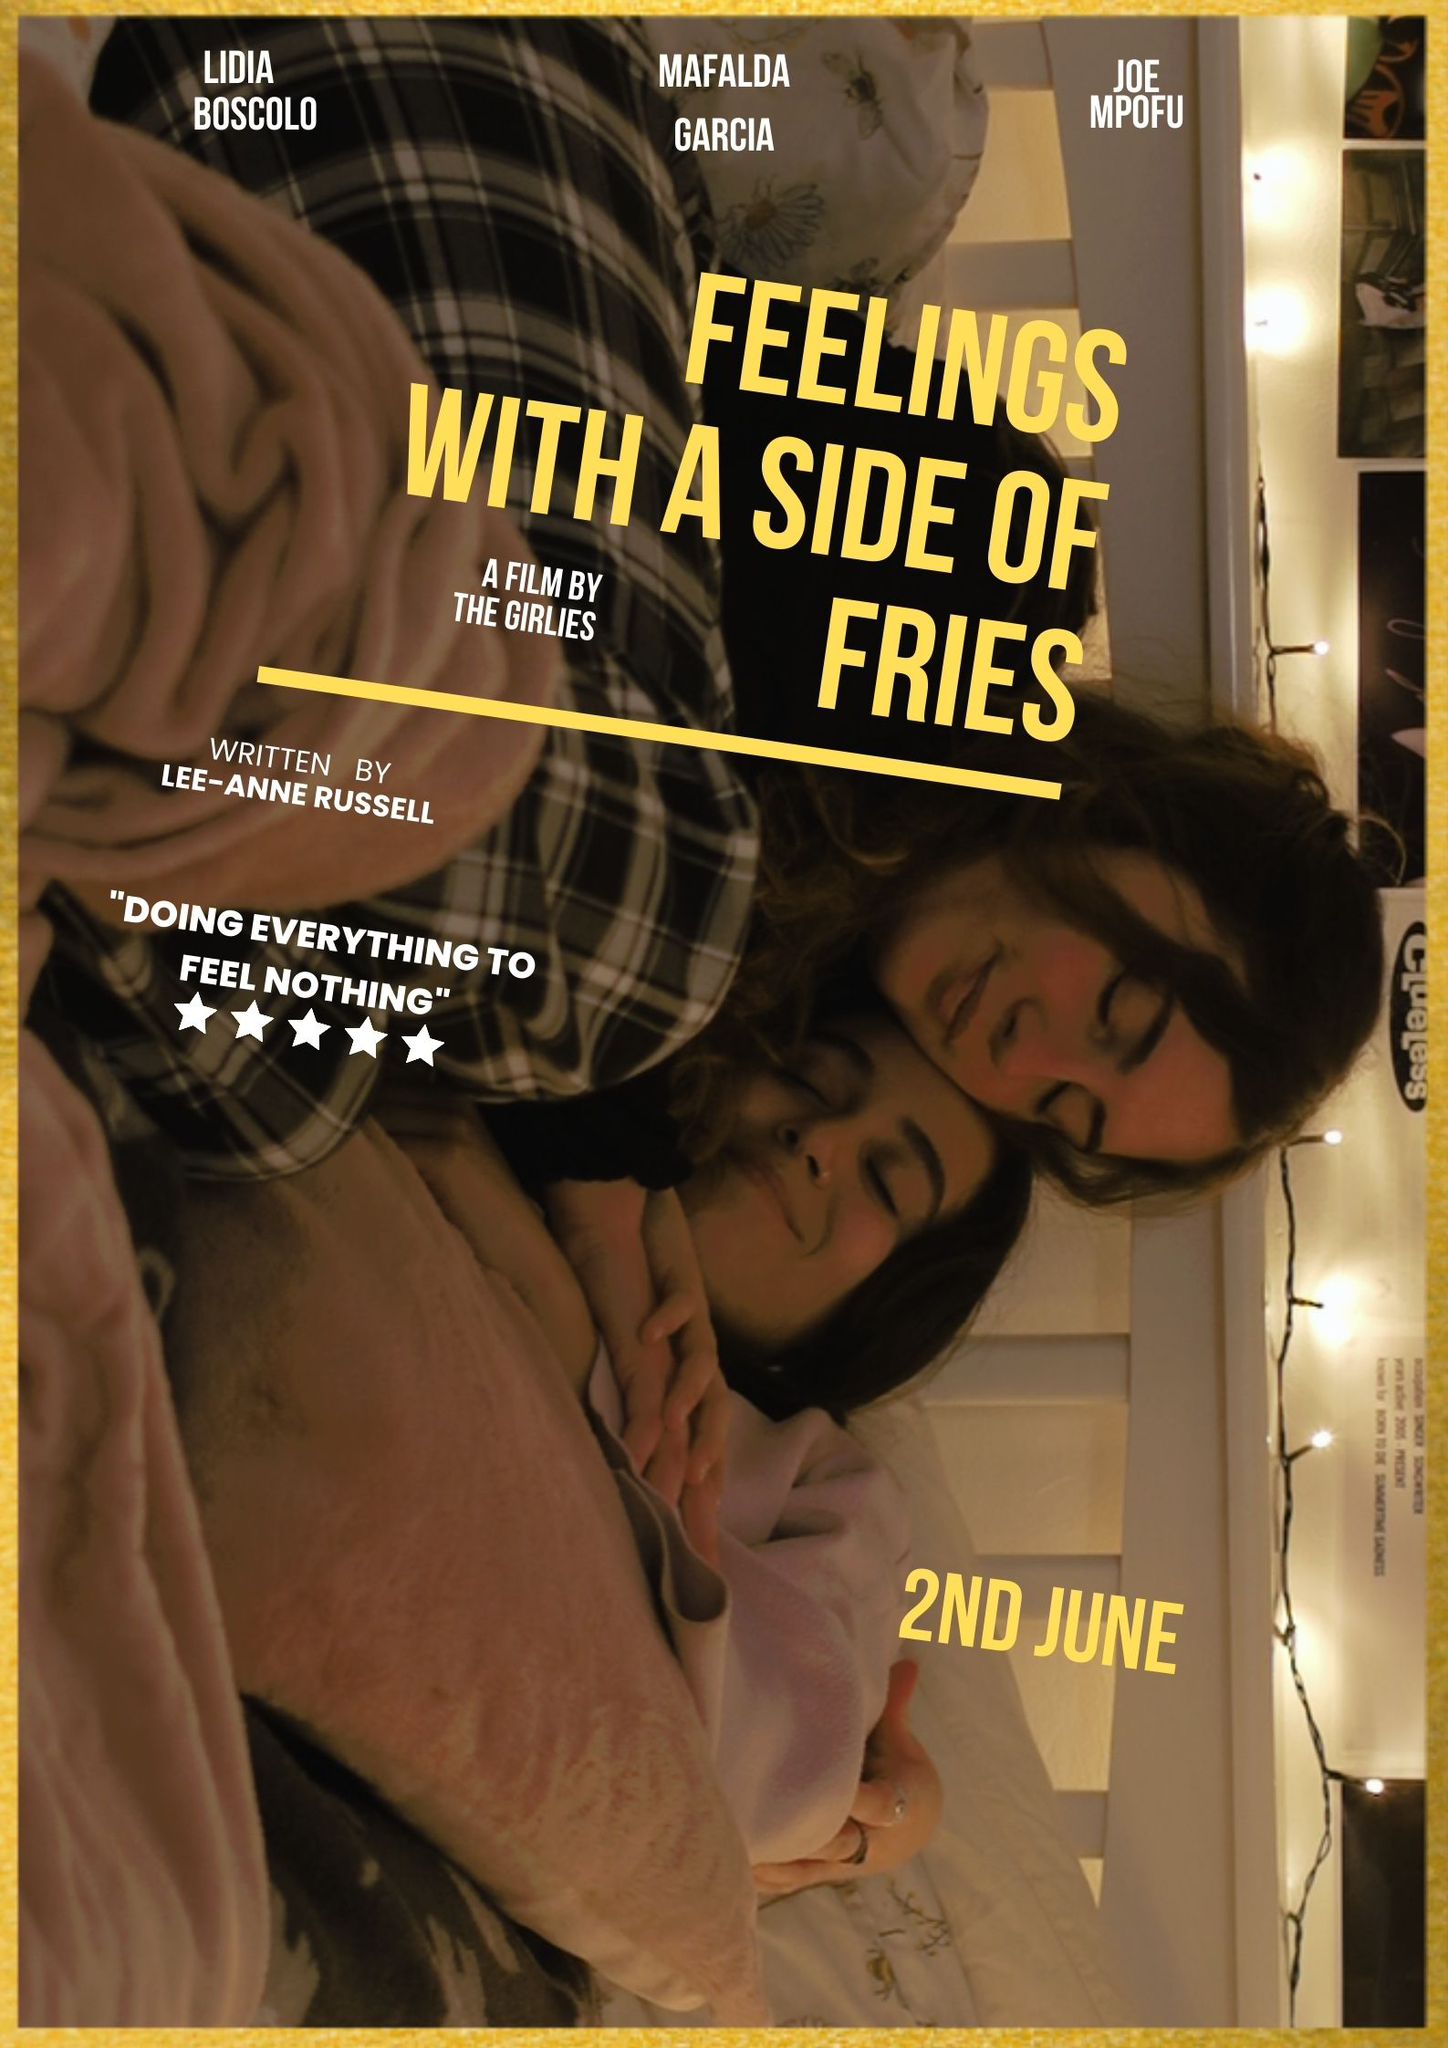 Lee-Ann Russell short film Feelings with a Side of Fries